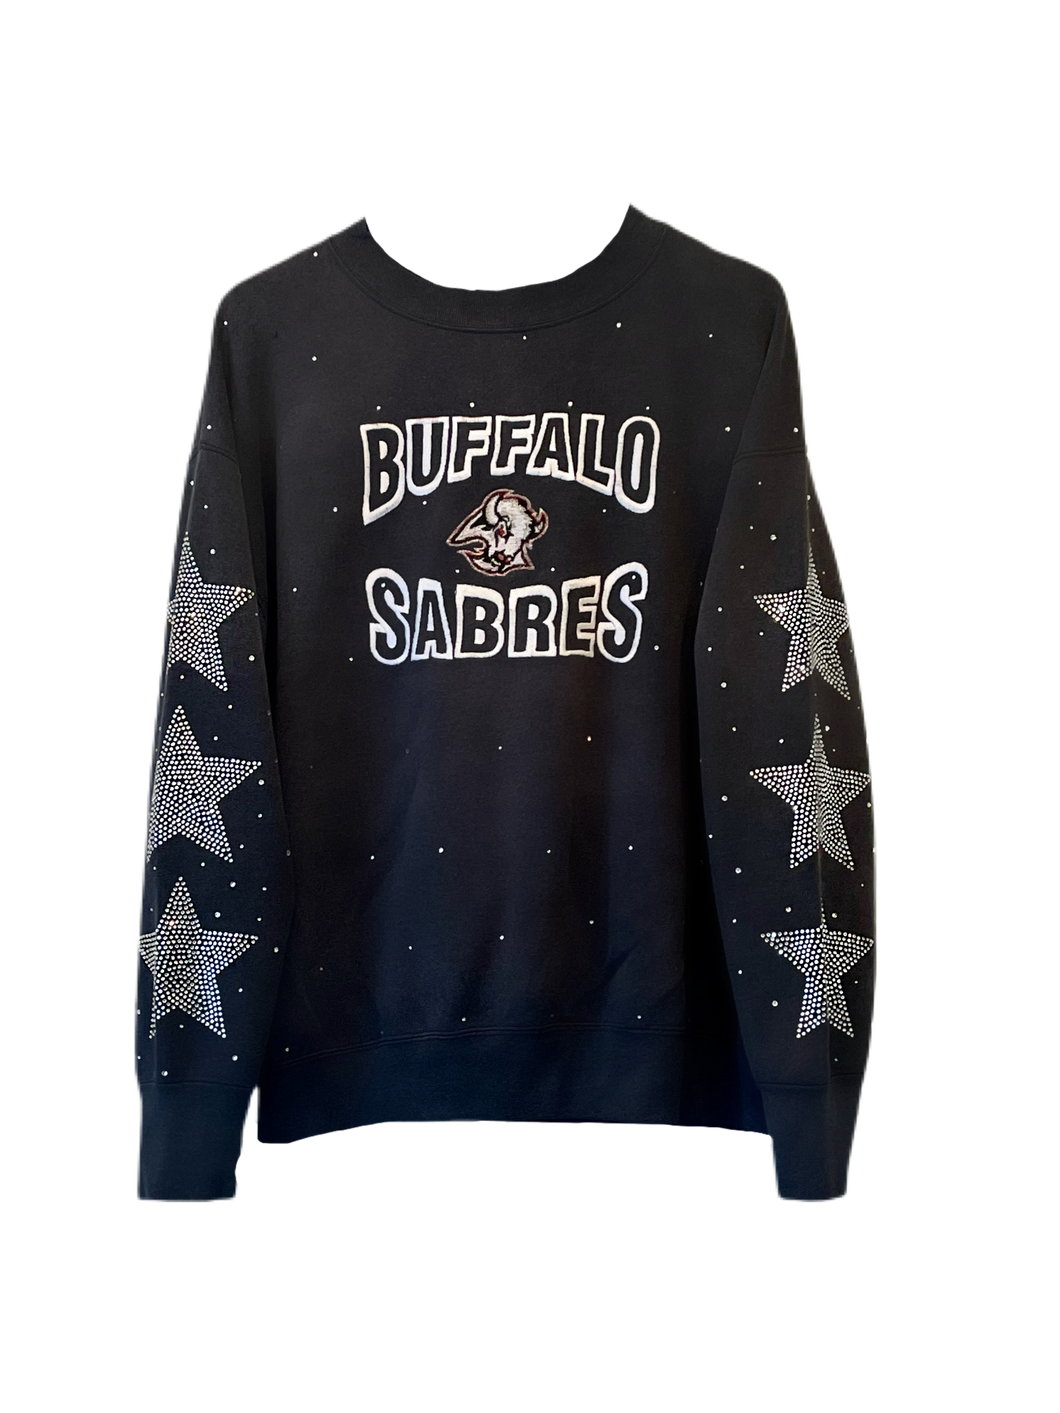 Buffalo Sabres, NHL One of a KIND Vintage Sweatshirt with Three Crystal Stars & Overall Crystal Design